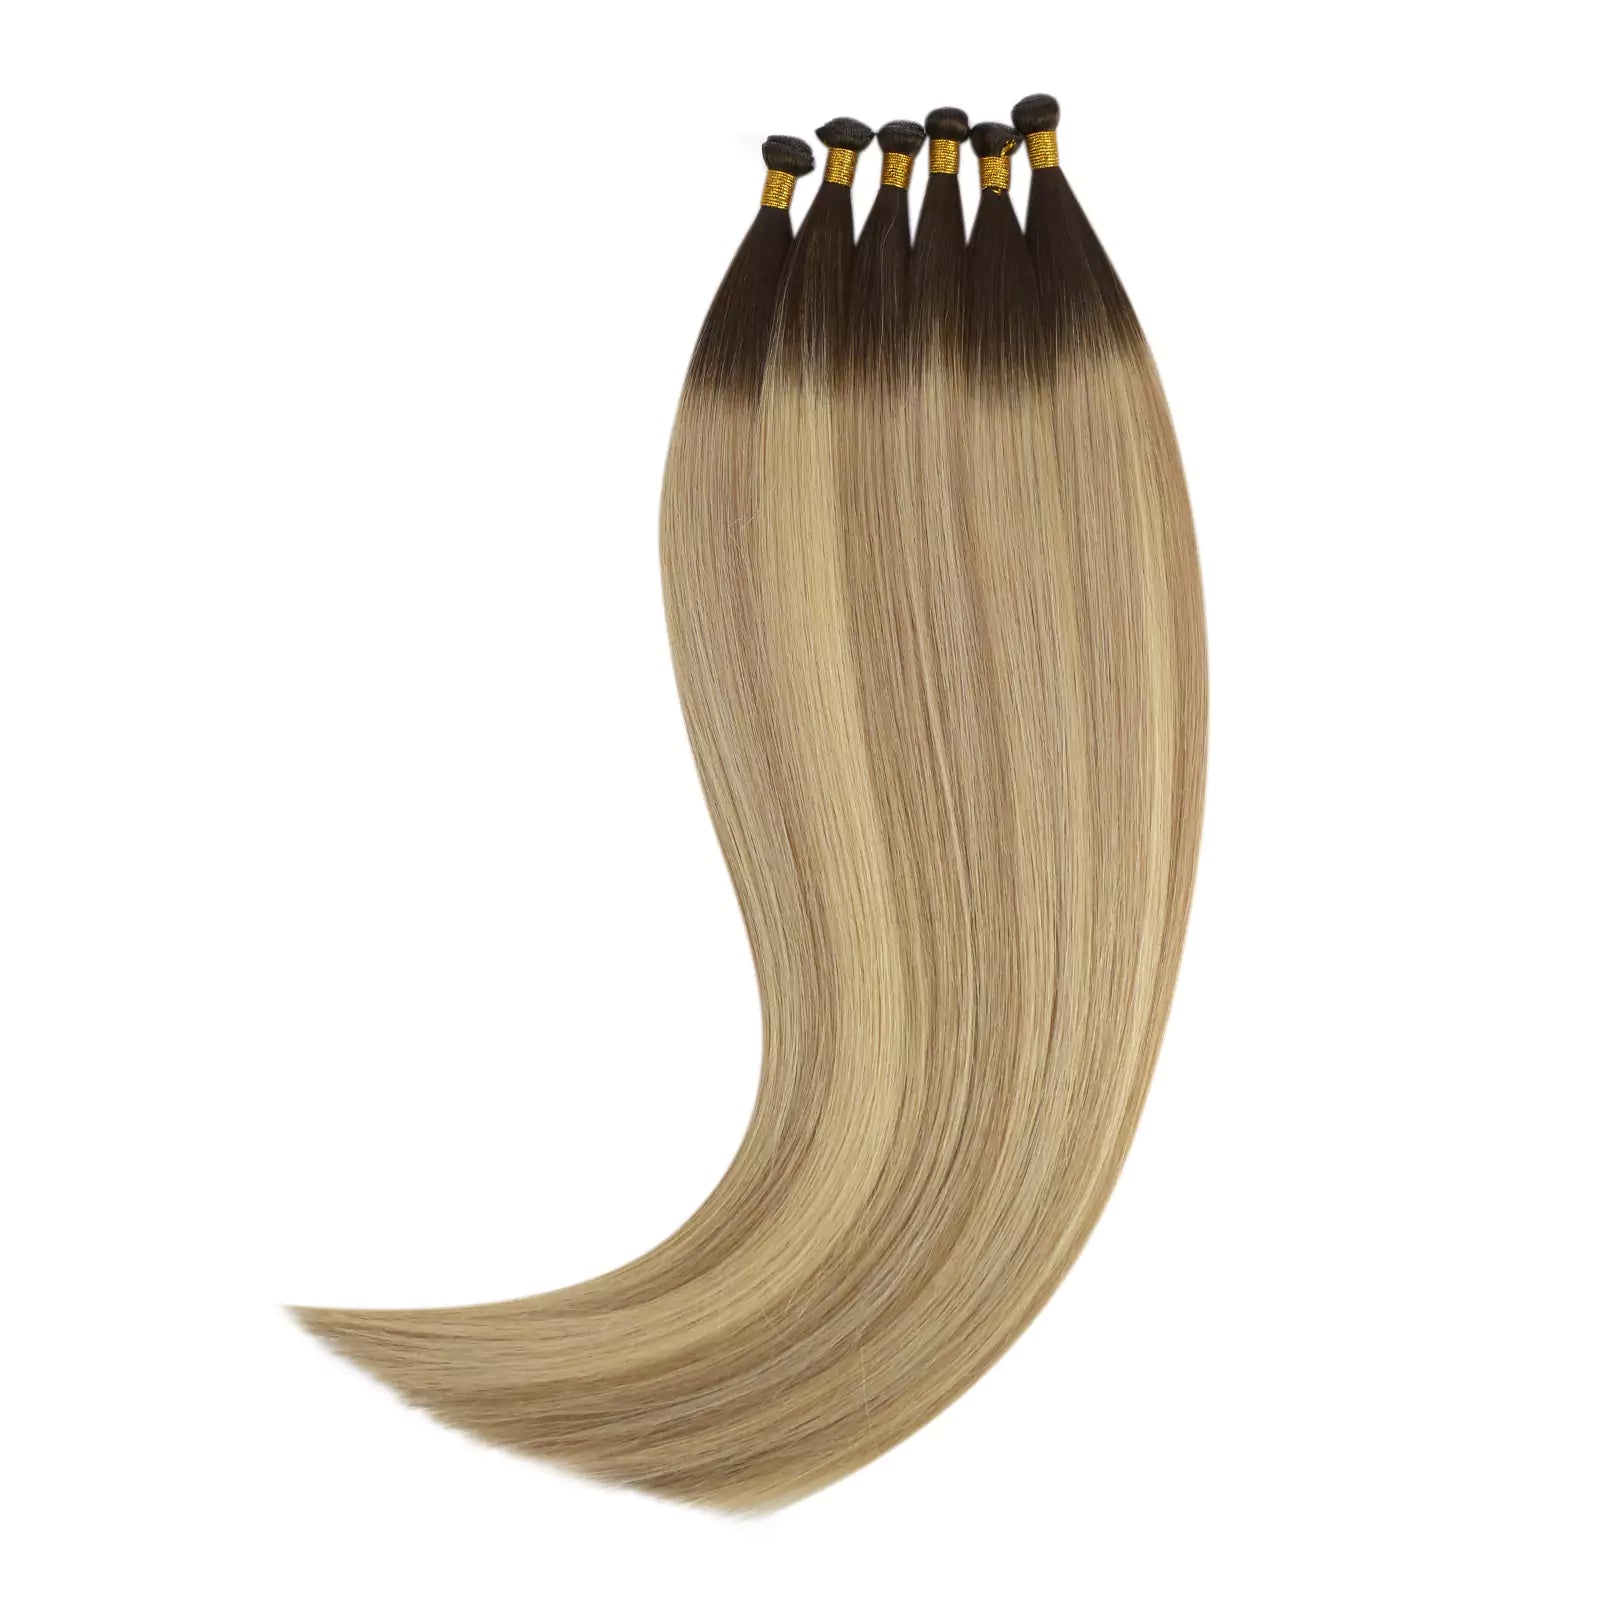 Full Cuticle Hybrid Weft Extensions Human Hair Balayage Color